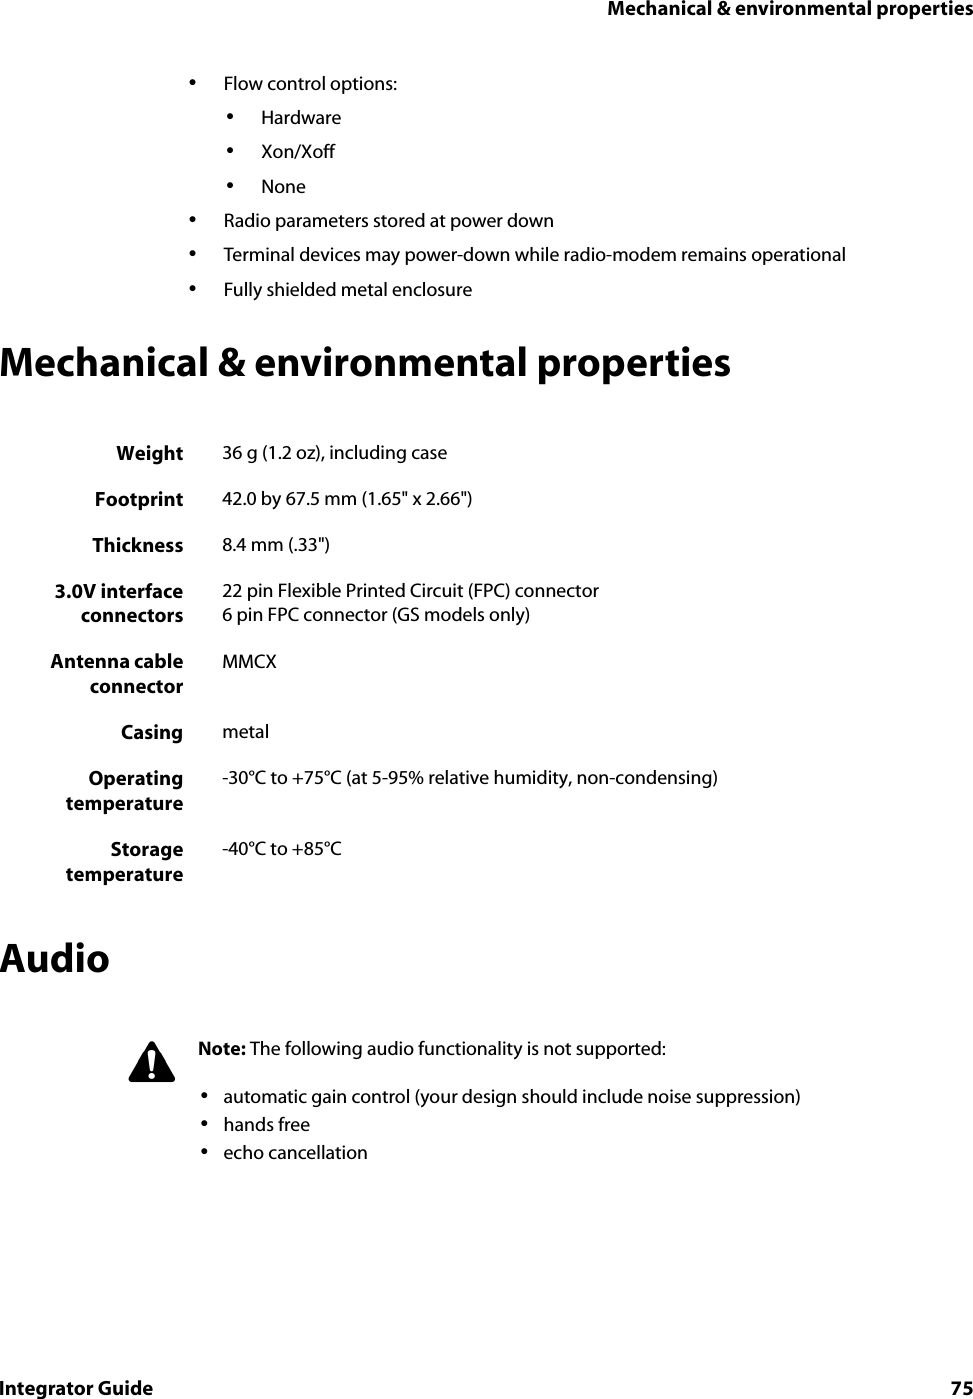 Mechanical &amp; environmental propertiesIntegrator Guide 75•Flow control options: •Hardware•Xon/Xoff•None•Radio parameters stored at power down•Terminal devices may power-down while radio-modem remains operational•Fully shielded metal enclosureMechanical &amp; environmental propertiesAudioWeight 36 g (1.2 oz), including caseFootprint 42.0 by 67.5 mm (1.65&quot; x 2.66&quot;)Thickness 8.4 mm (.33&quot;)3.0V interfaceconnectors22 pin Flexible Printed Circuit (FPC) connector6 pin FPC connector (GS models only)Antenna cableconnectorMMCXCasing metalOperatingtemperature-30°C to +75°C (at 5-95% relative humidity, non-condensing)Storagetemperature-40°C to +85°CNote: The following audio functionality is not supported:•automatic gain control (your design should include noise suppression)•hands free•echo cancellation